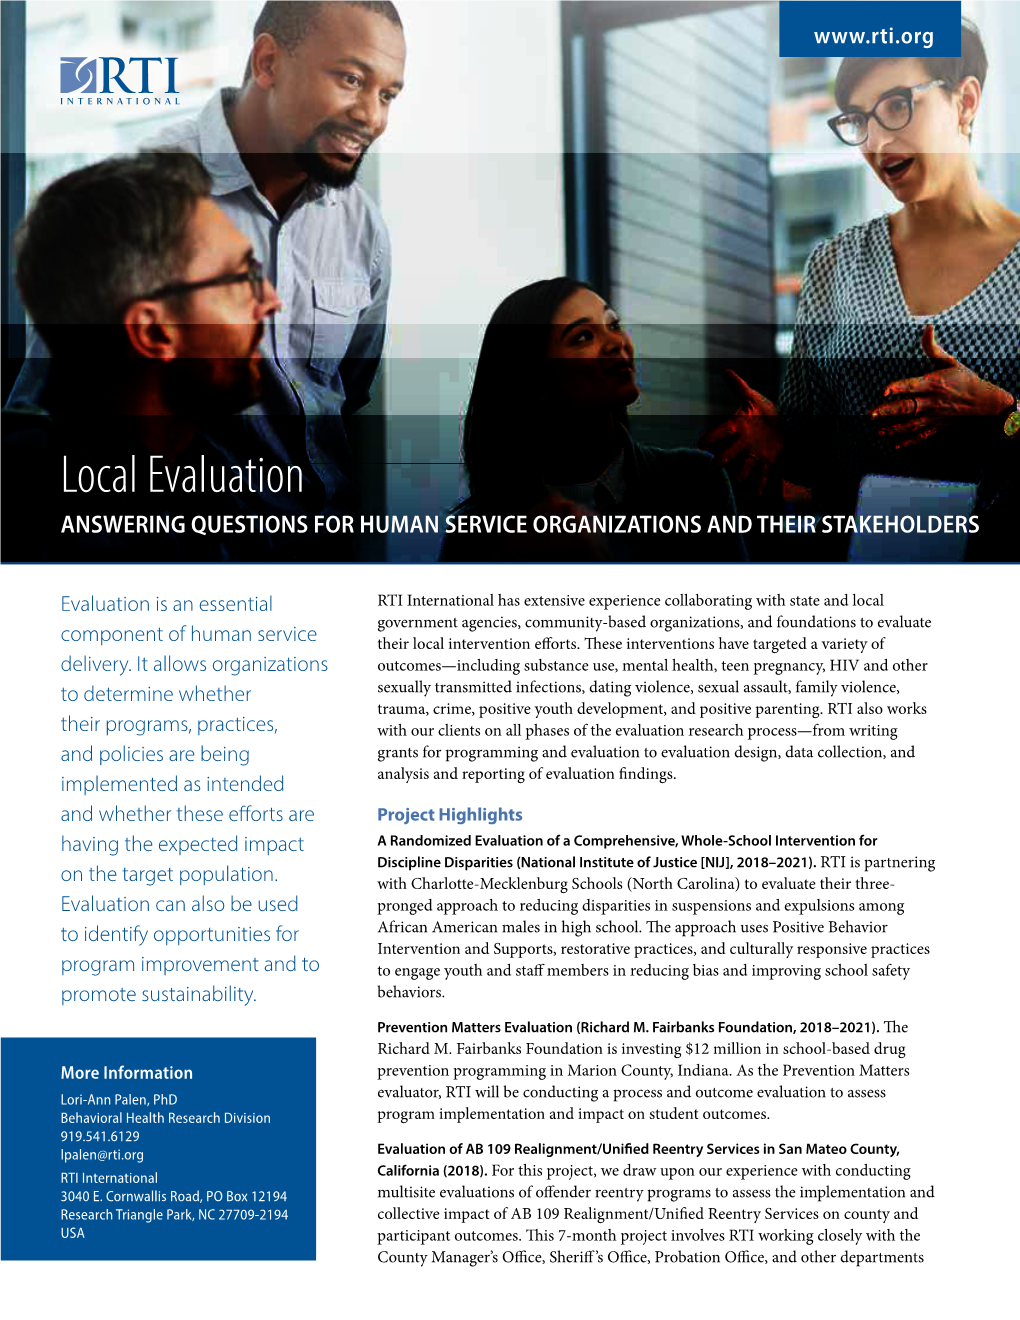 Local Evaluation ANSWERING QUESTIONS for HUMAN SERVICE ORGANIZATIONS and THEIR STAKEHOLDERS